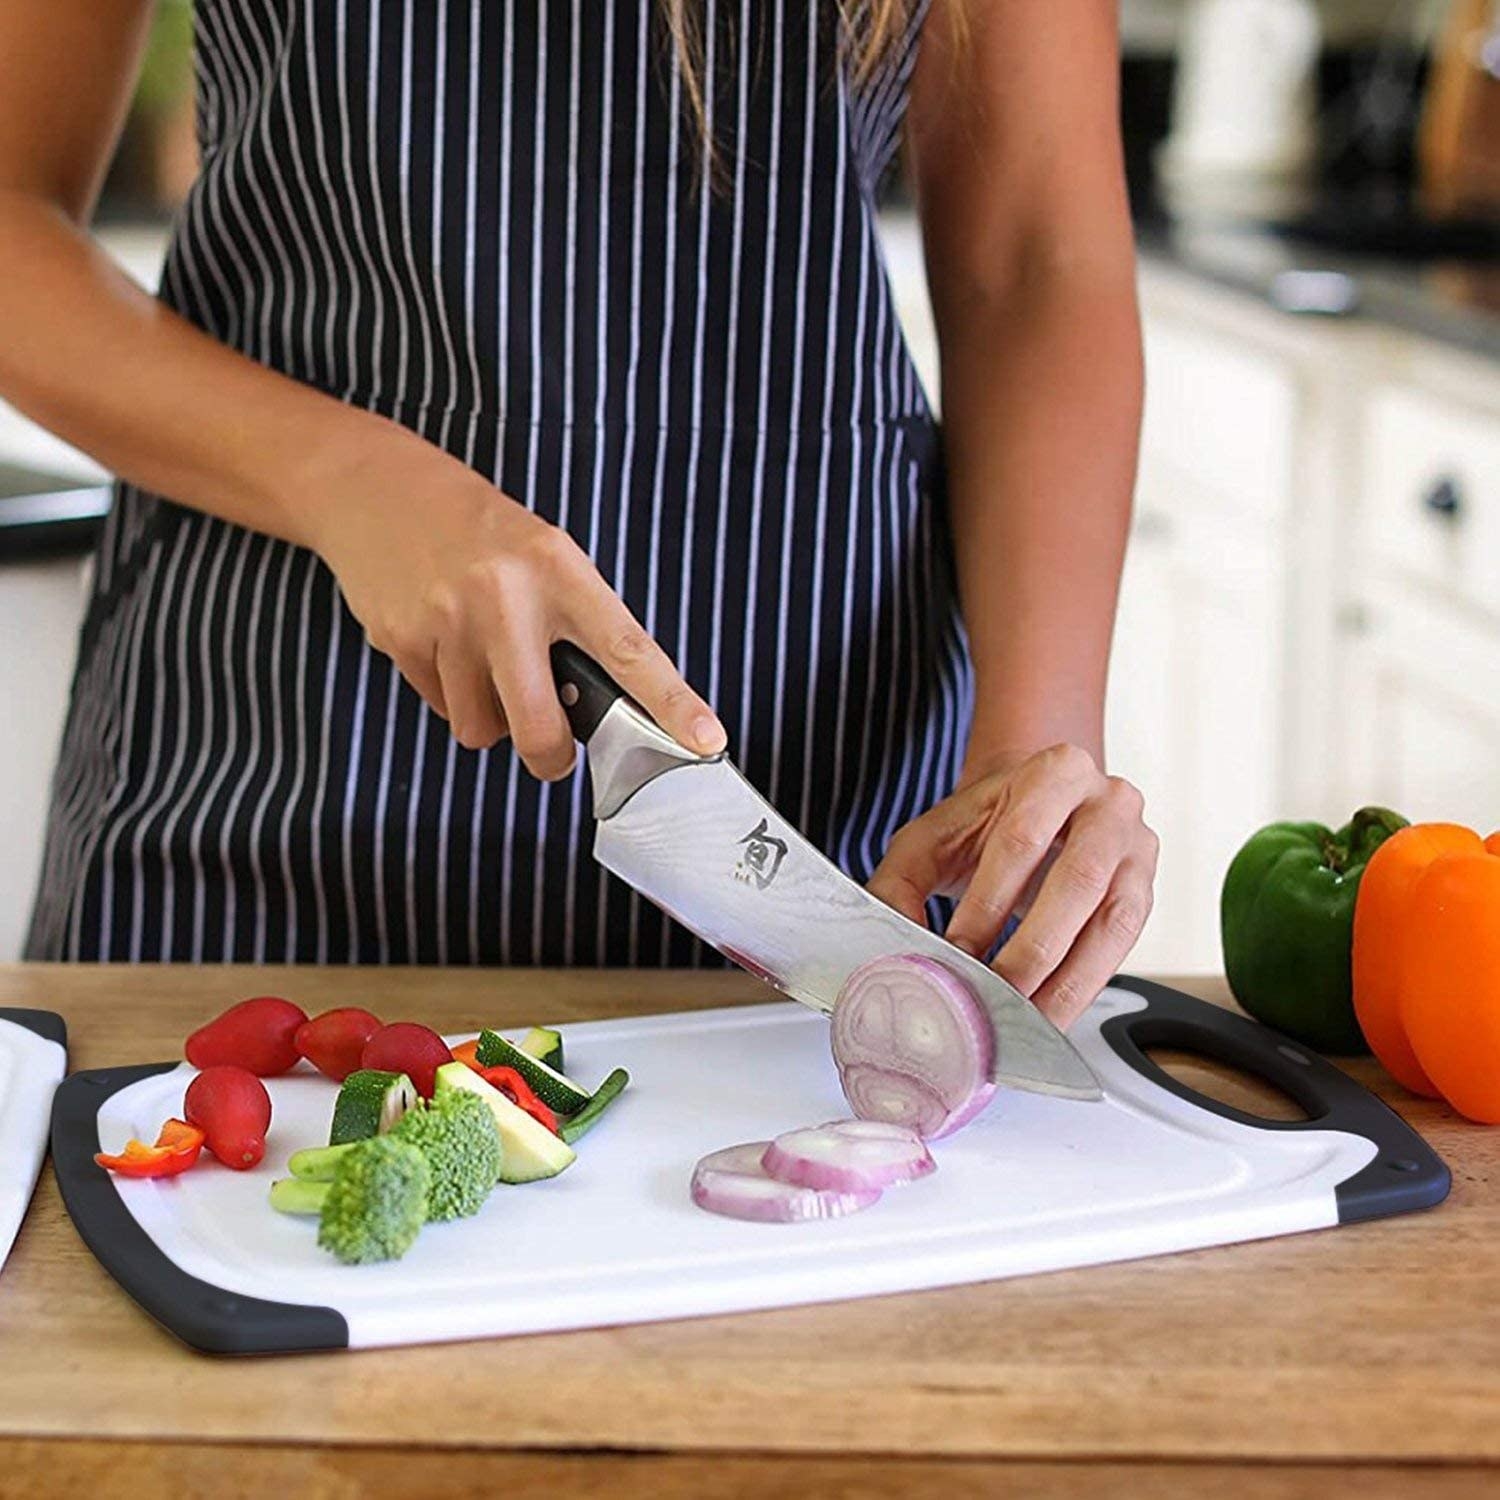 A person cutting vegetables on the largest cutting board